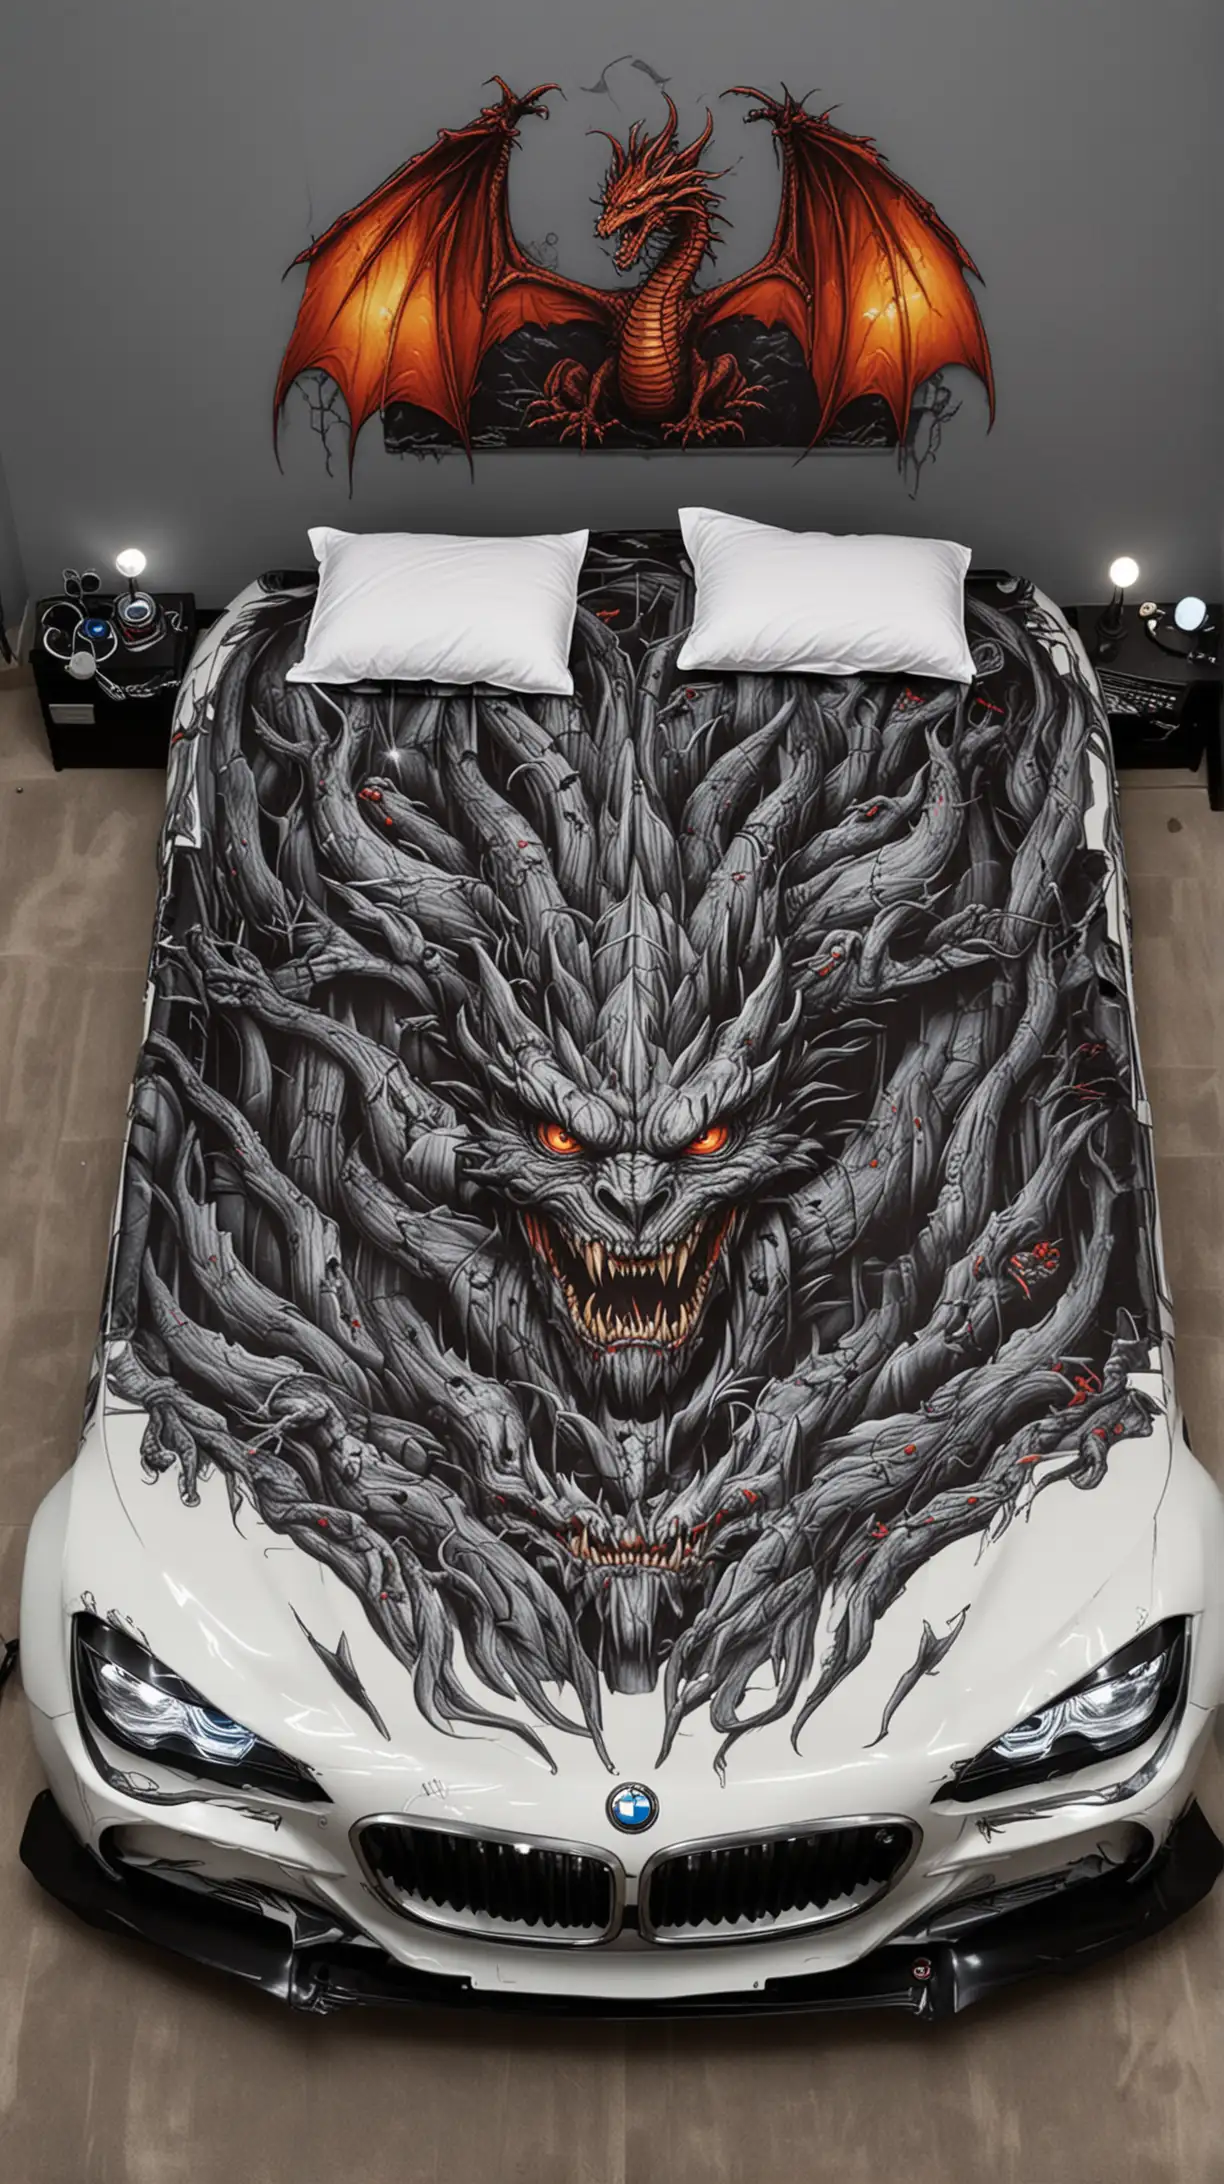 BMW CarShaped Double Bed with Good and Evil Dragon Graphics